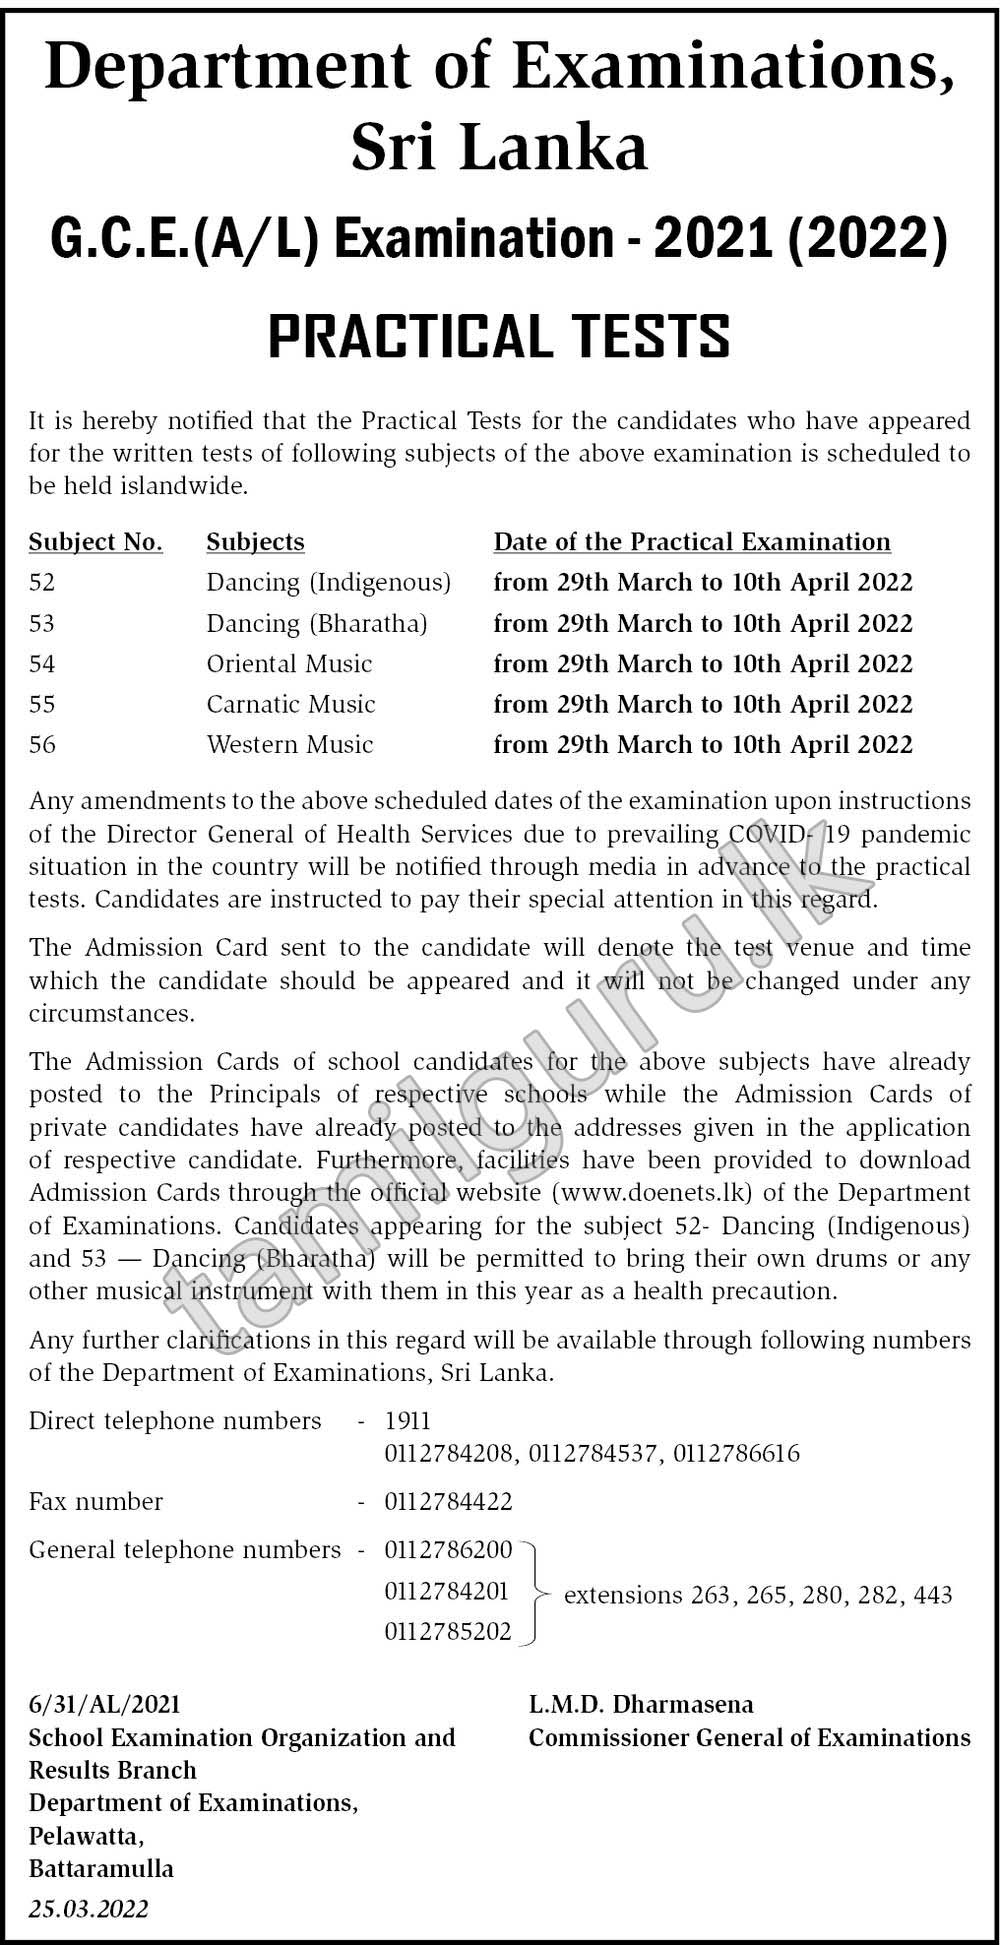 Exam Dates & Admission Card for GCE A/L Examination 2021 (2022) - Practical Test (Notice in English)